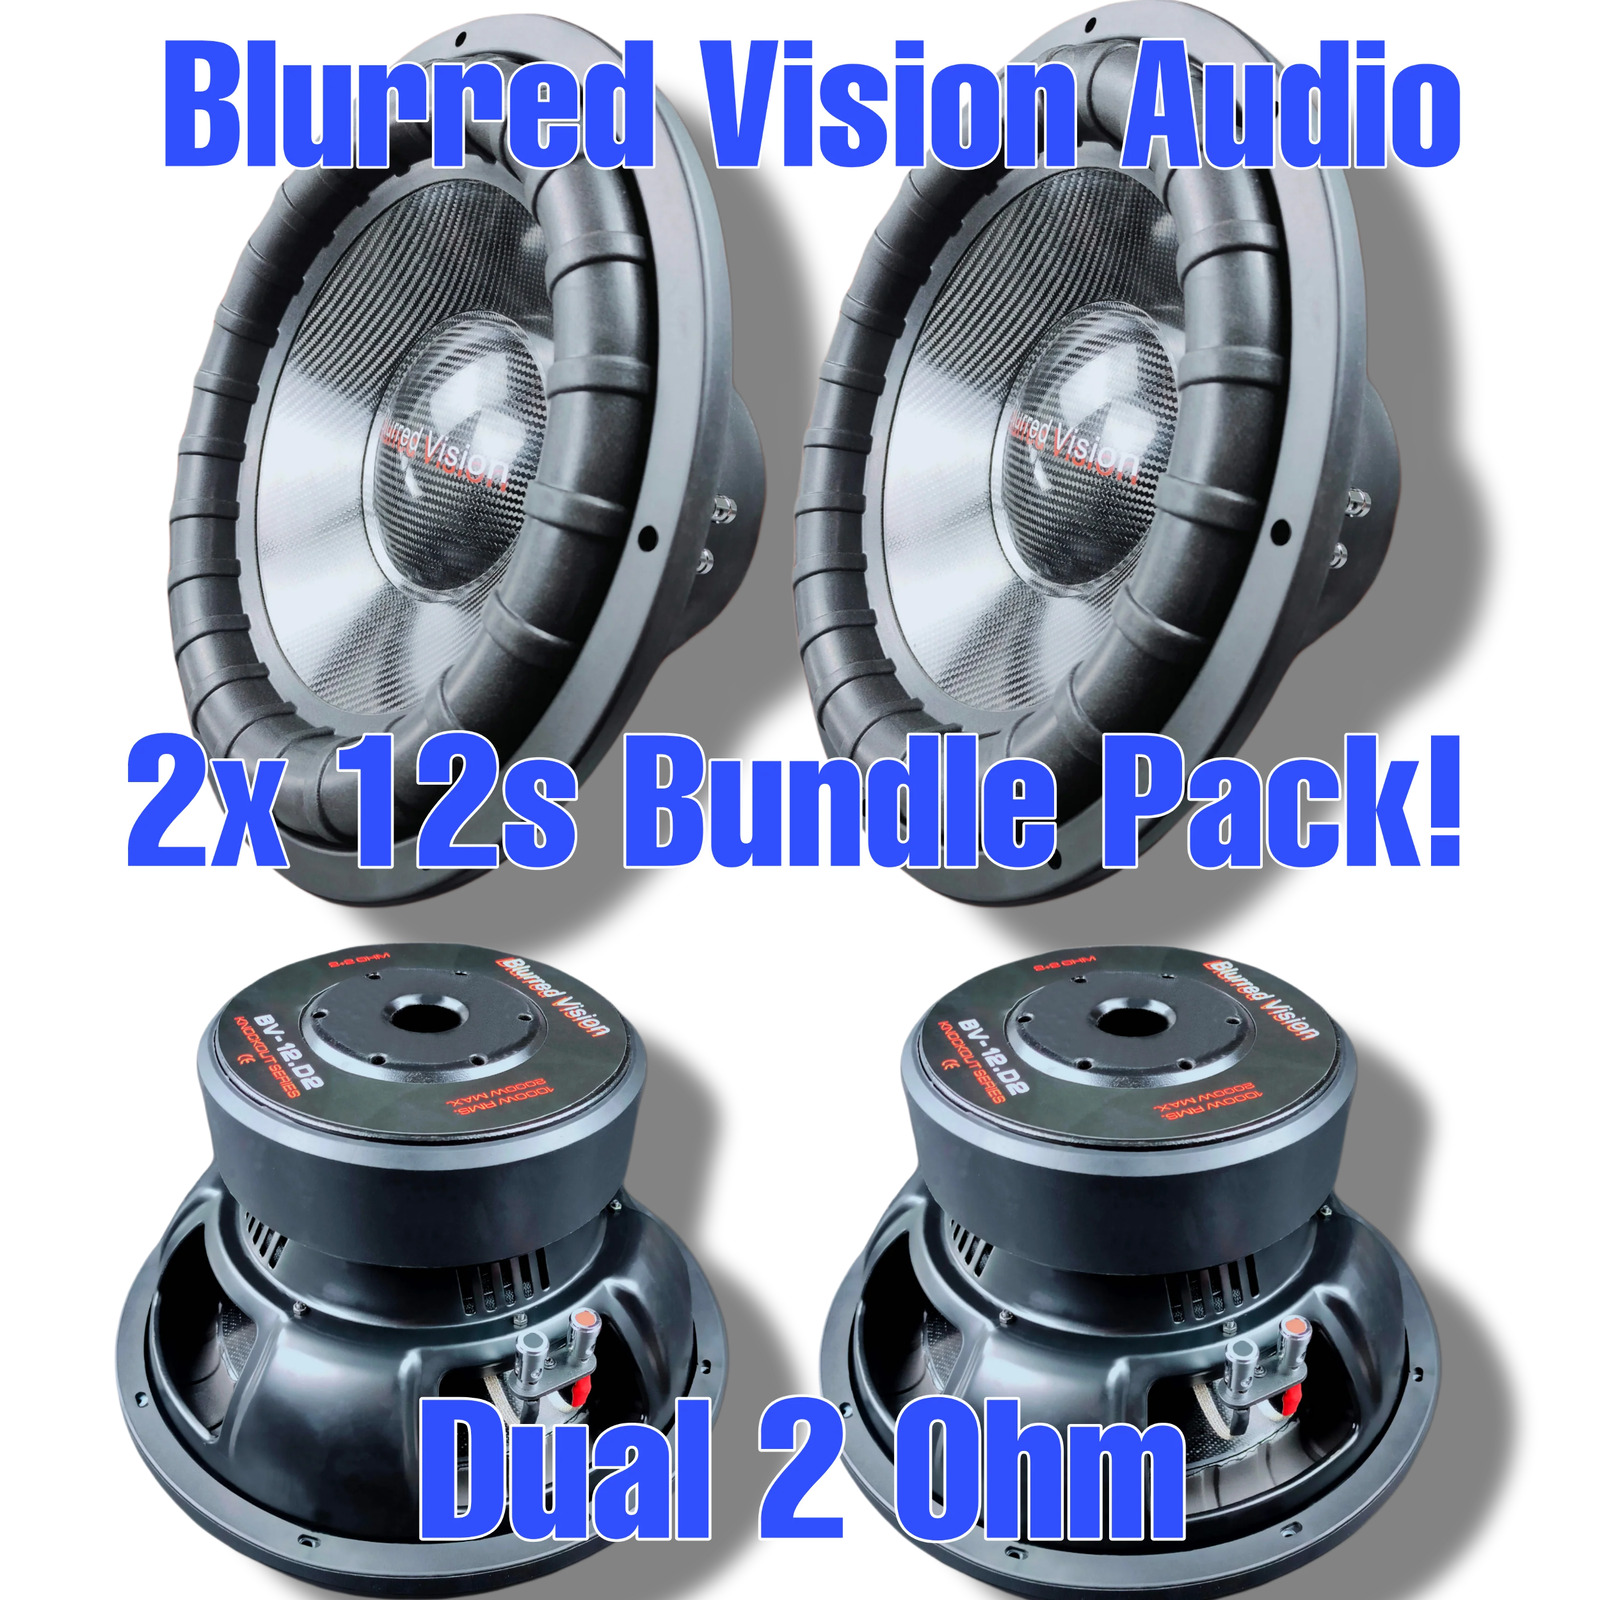 2*Blurred Vision Audio 2x 12s COMBO PACK Knockout Sereis D2 Bundle Pack